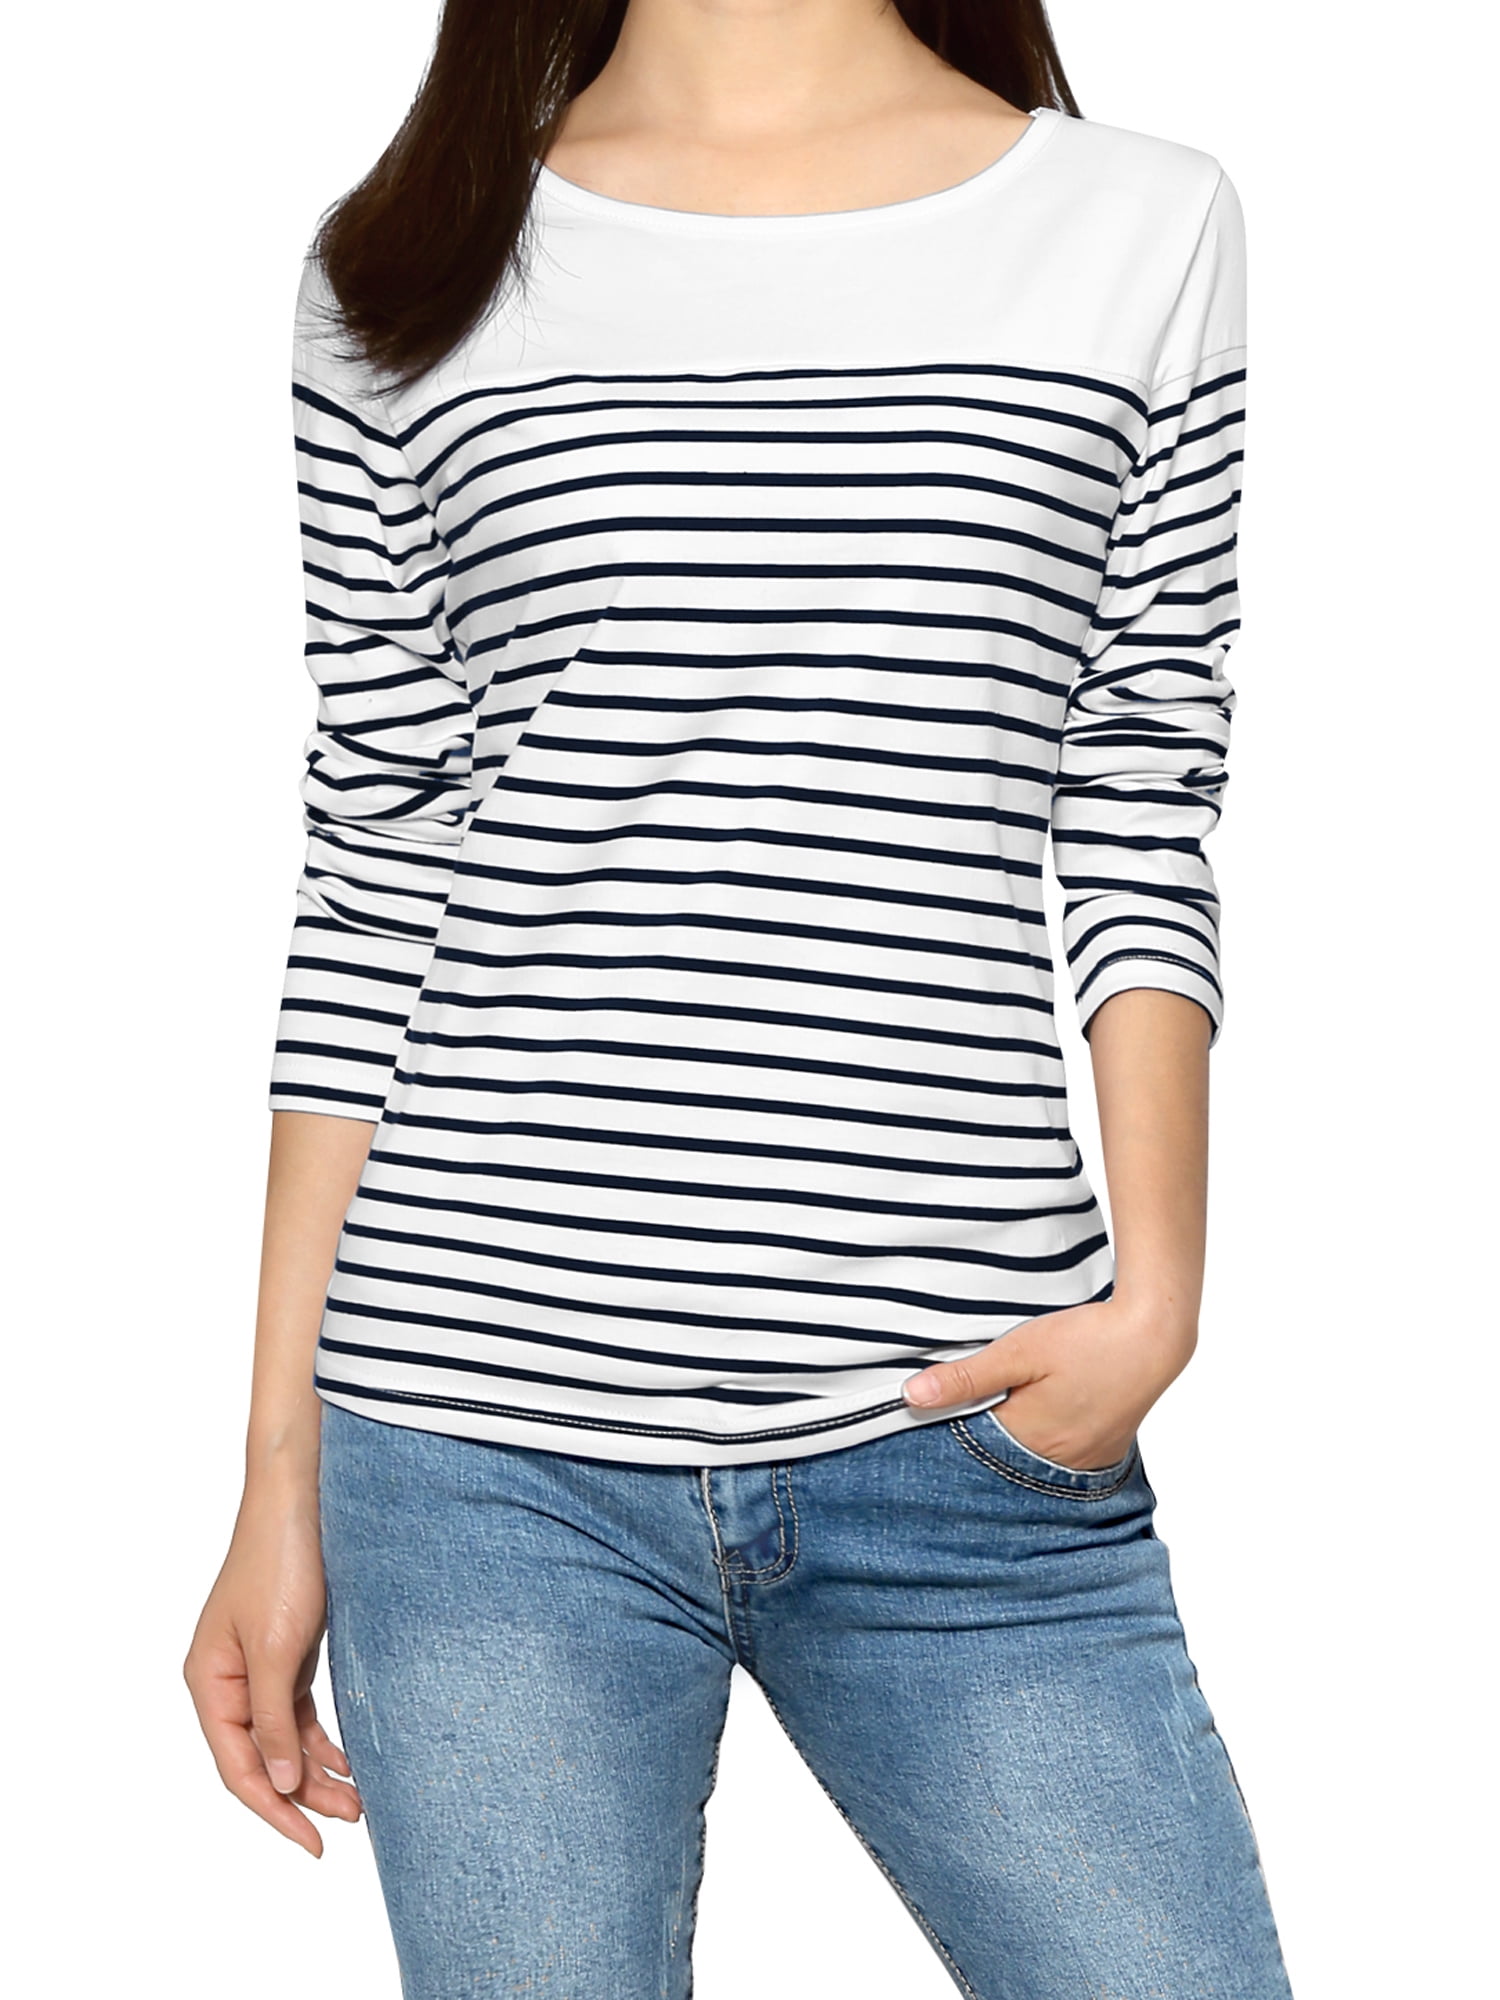 Unique Bargains - Women Horizontal Striped Round Neck Long Sleeves Tee